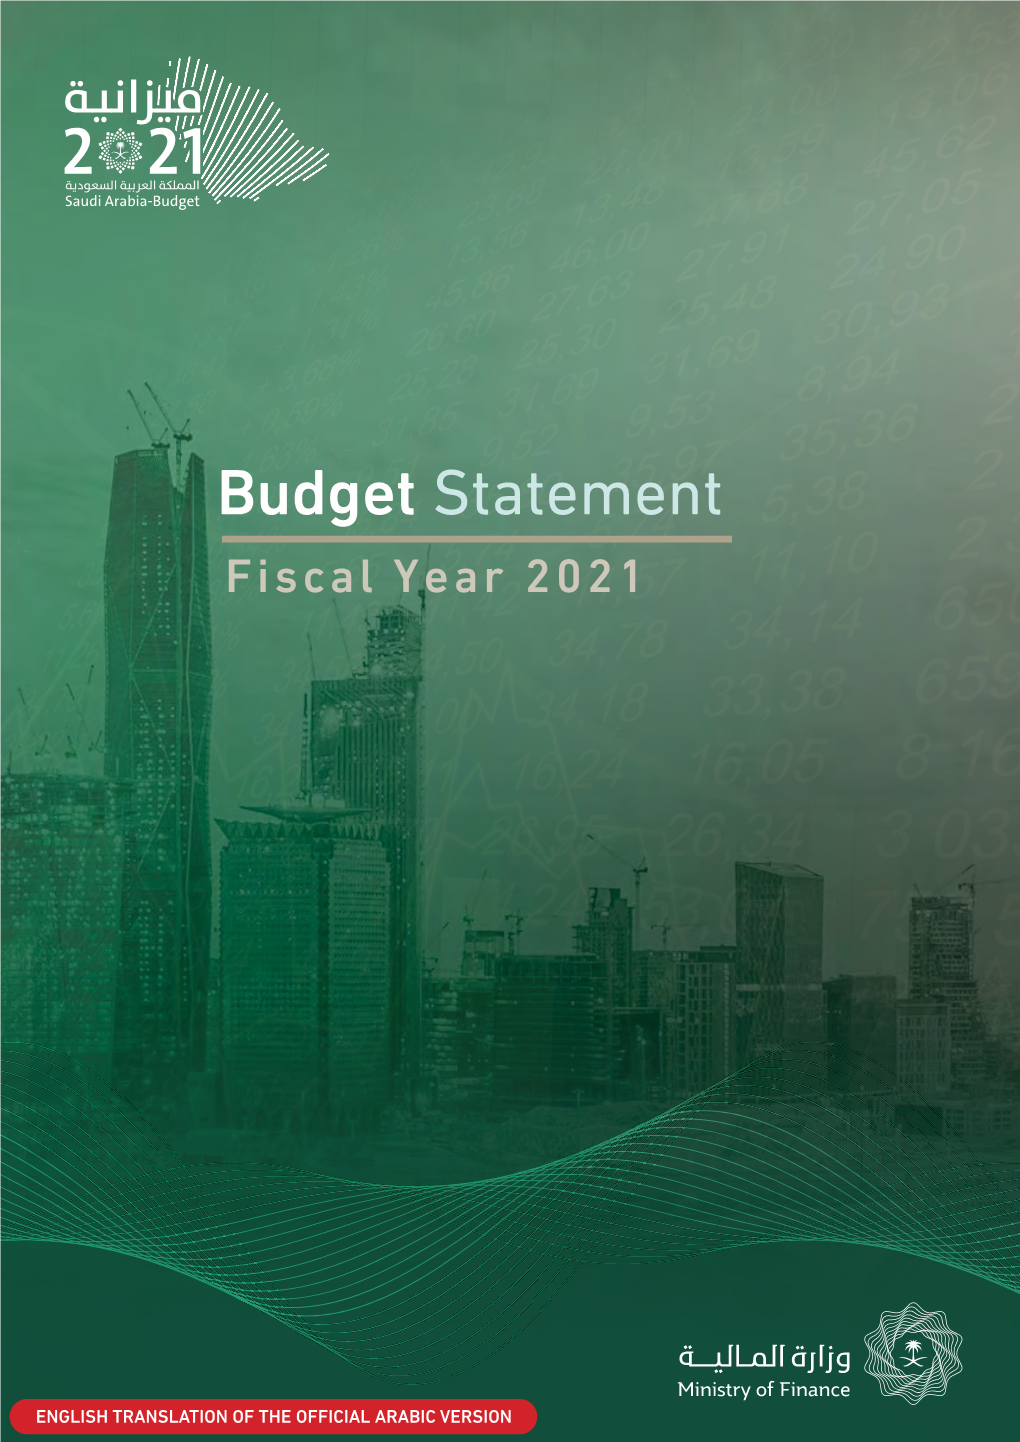 Budget Statement: Fiscal Year 2021